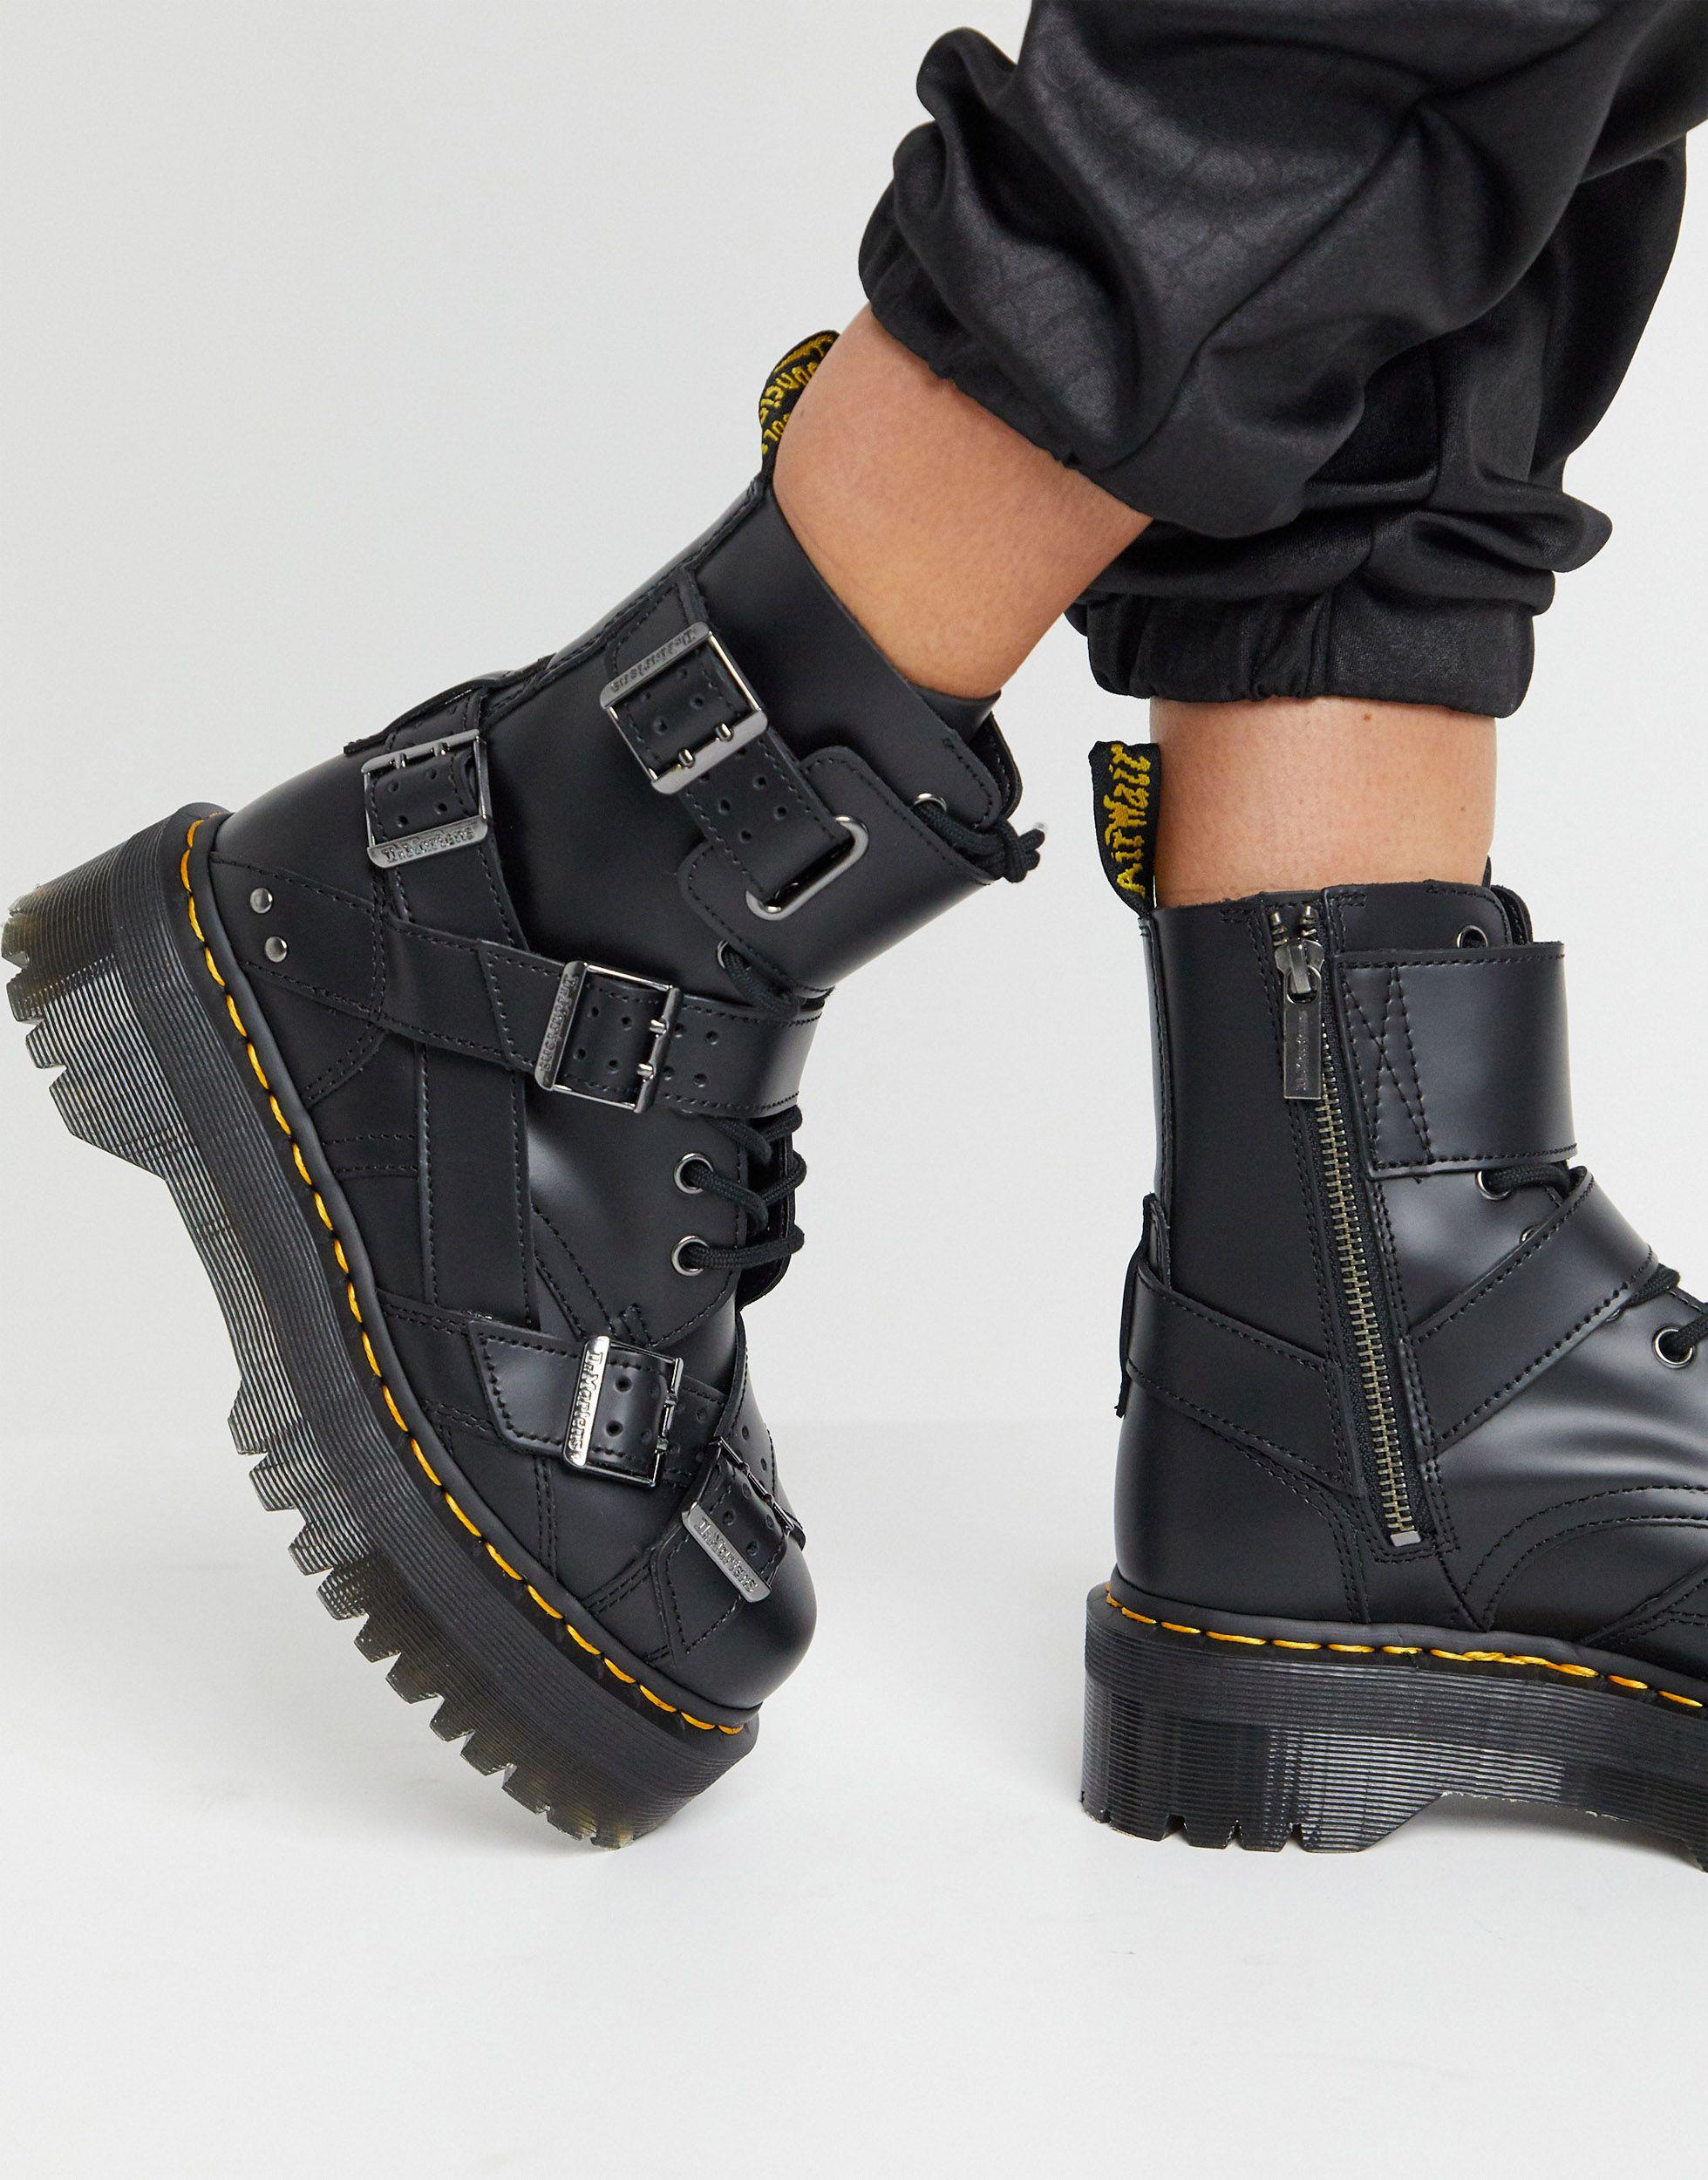 Dr Martens Boots Strap Norway, SAVE 40% - lutheranems.com